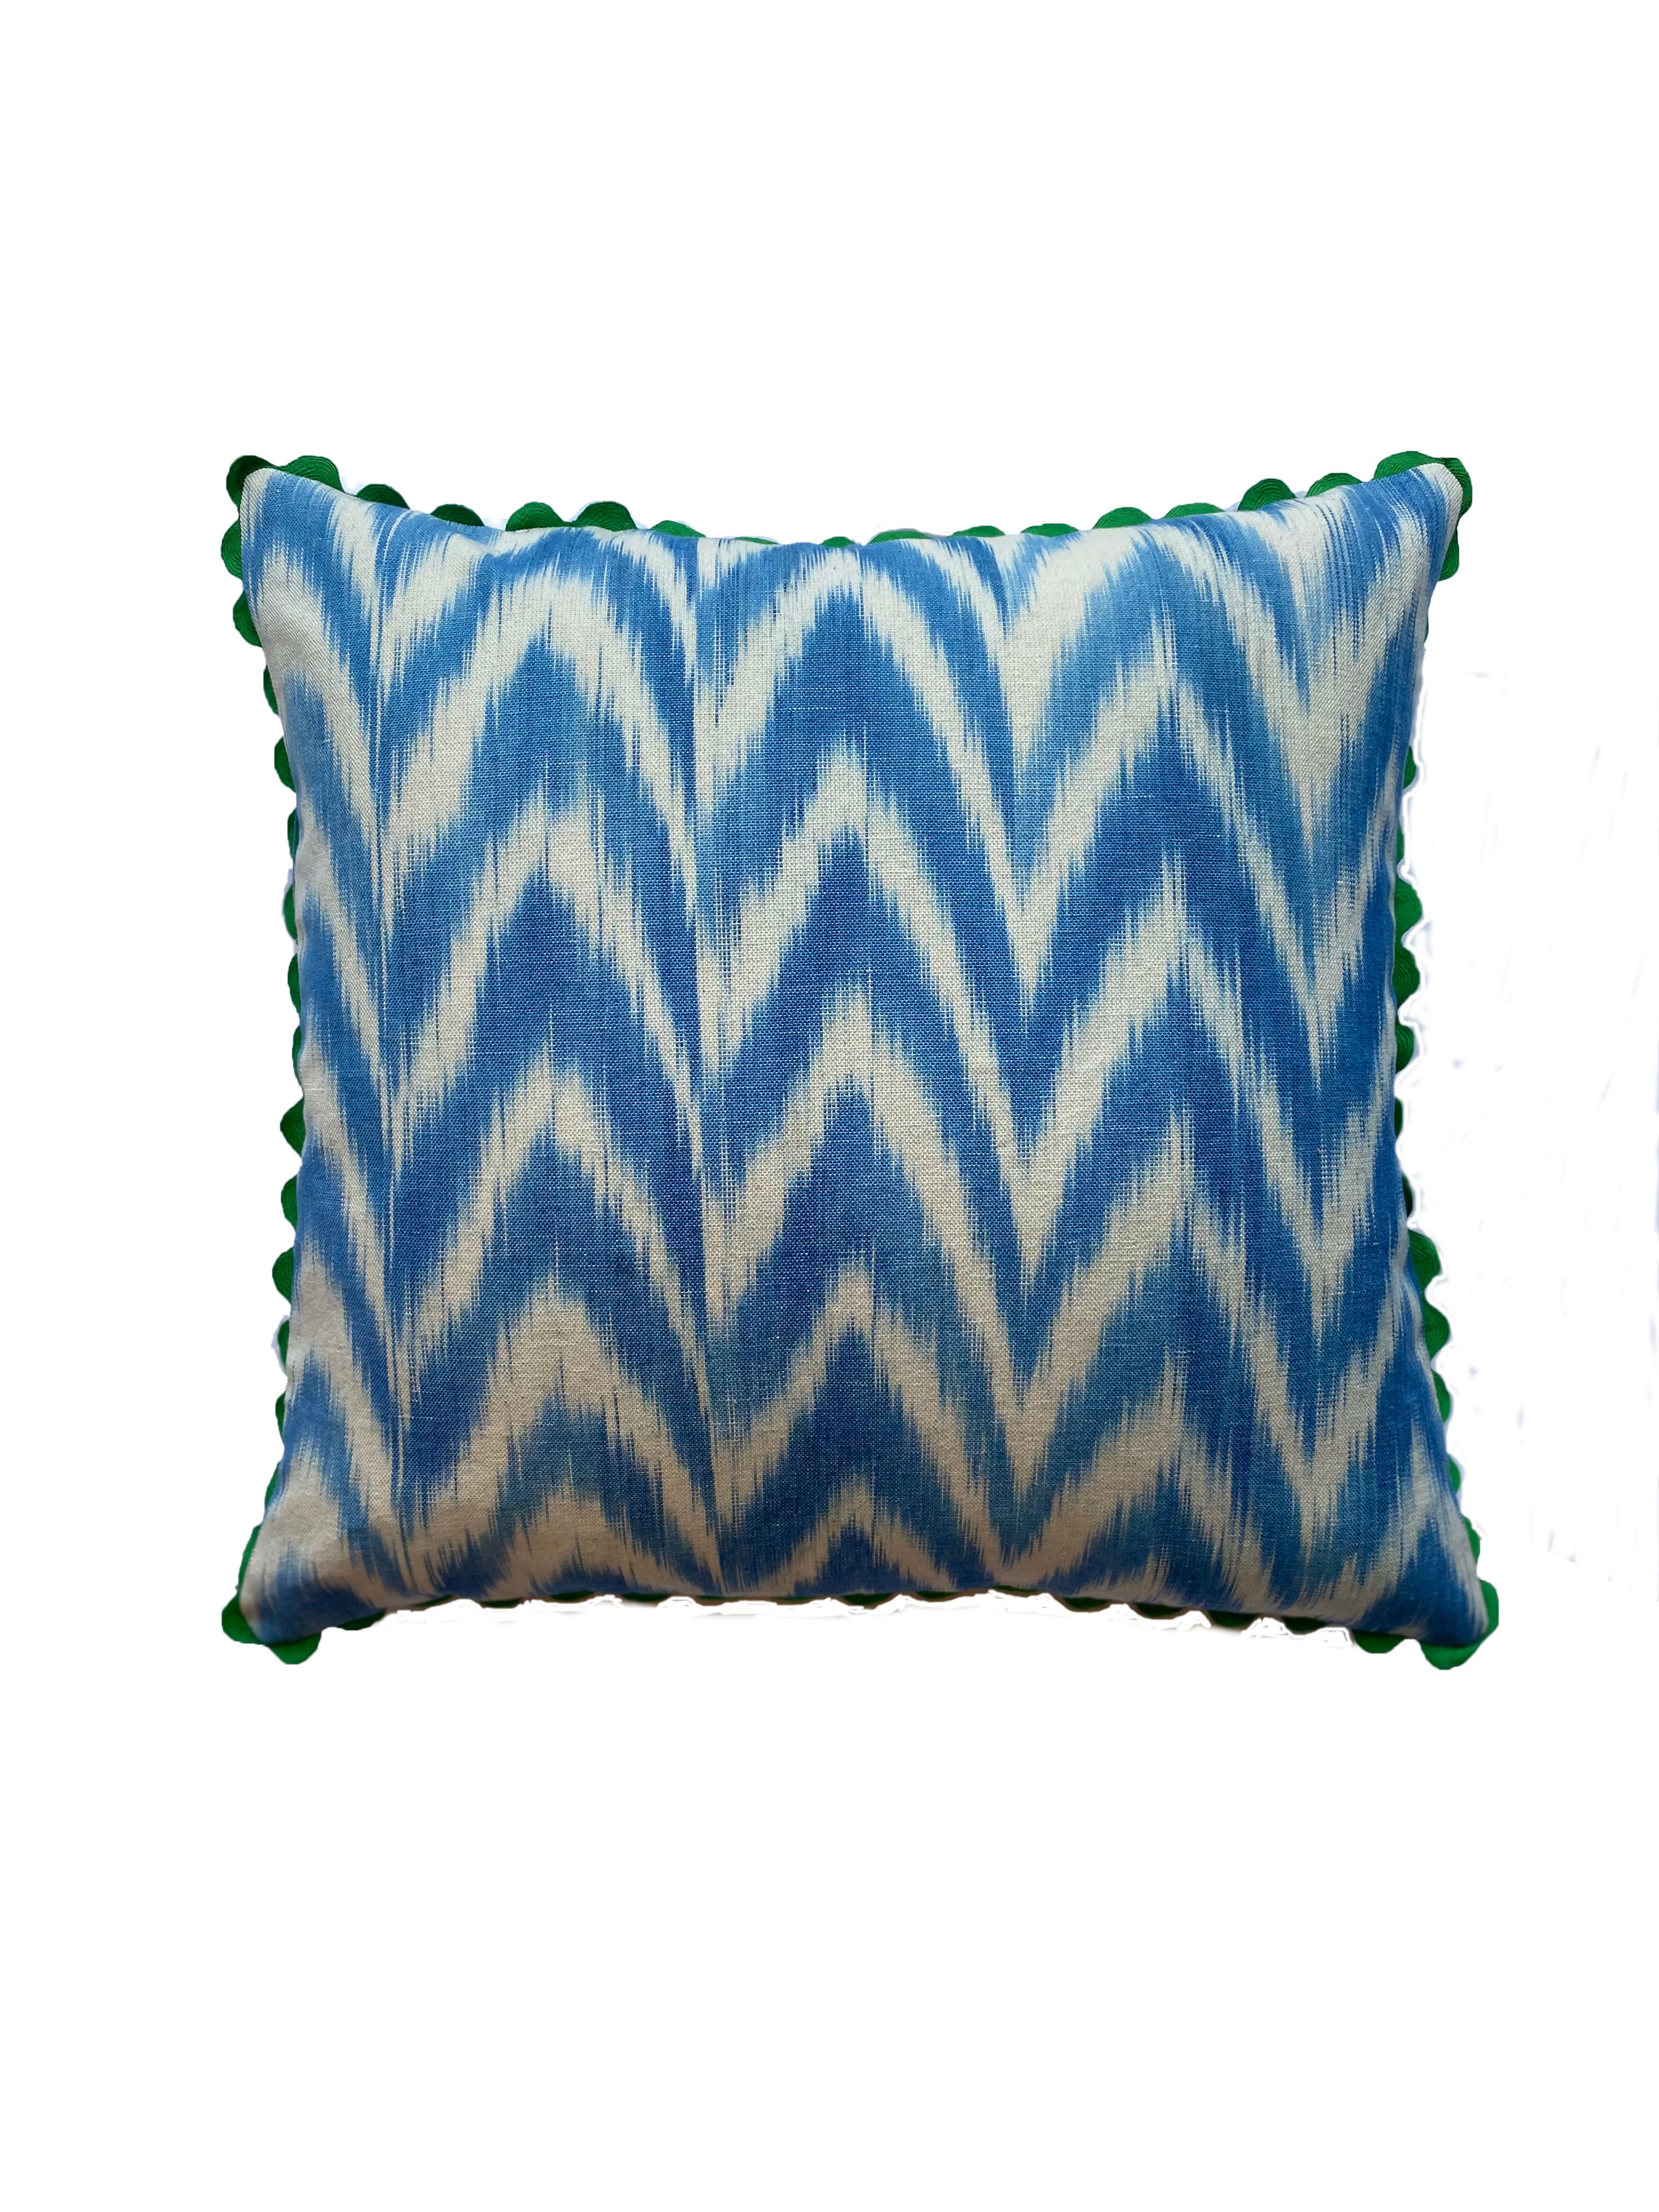 MALLORCAN FABRIC CUSHION - SKY BLUE FLAMESTITCH WITH NAVY SCALLOP EDGING